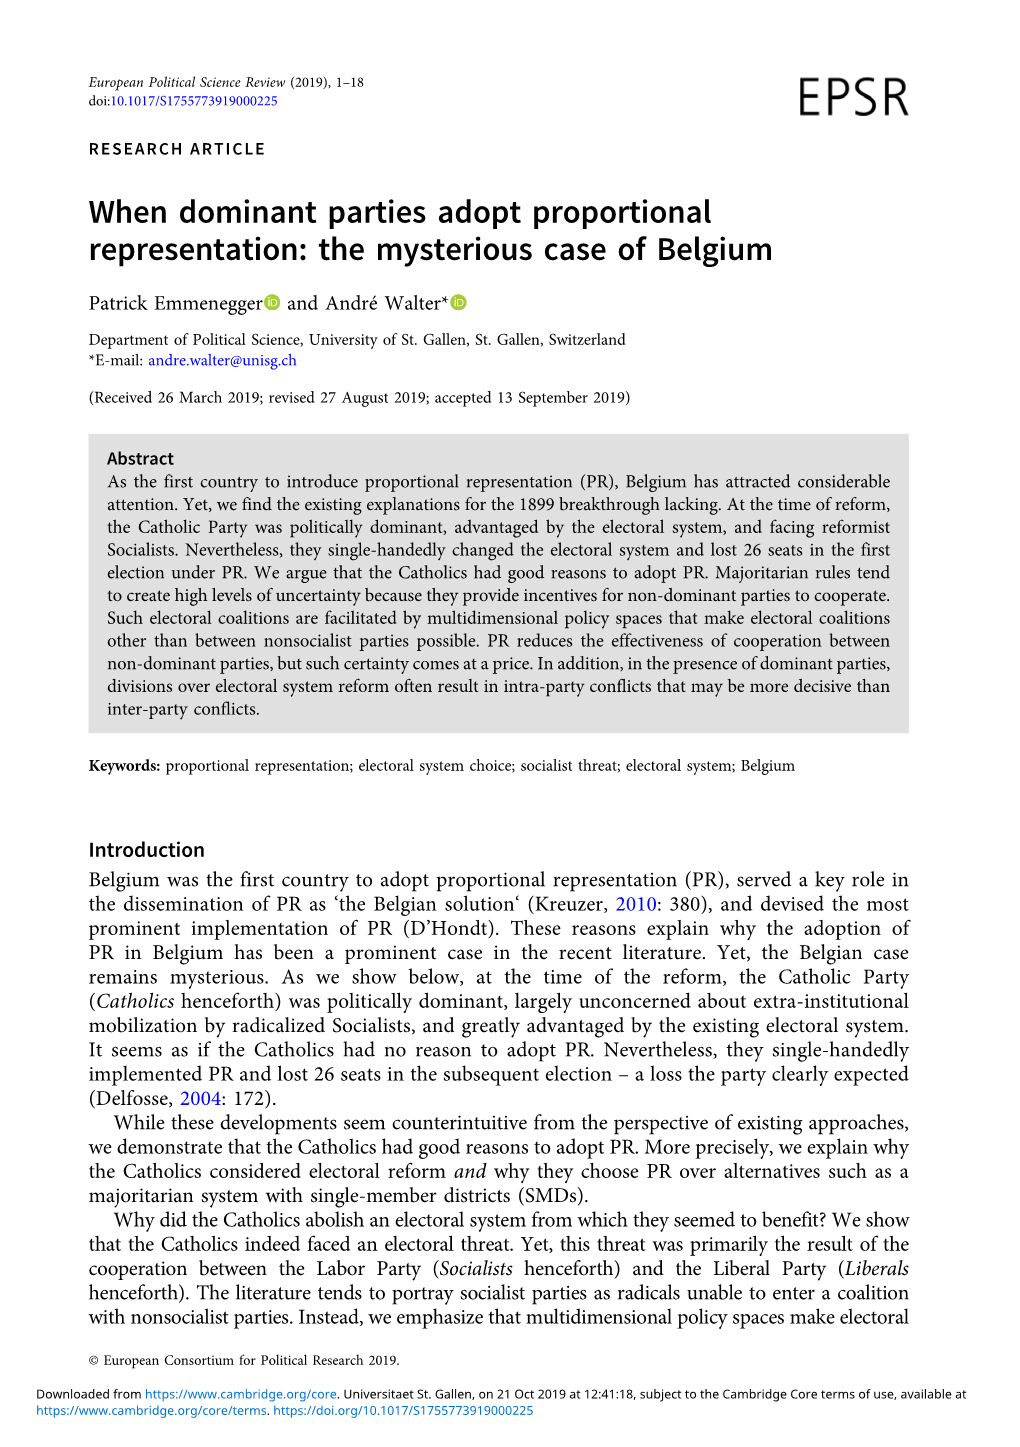 When Dominant Parties Adopt Proportional Representation: the Mysterious Case of Belgium